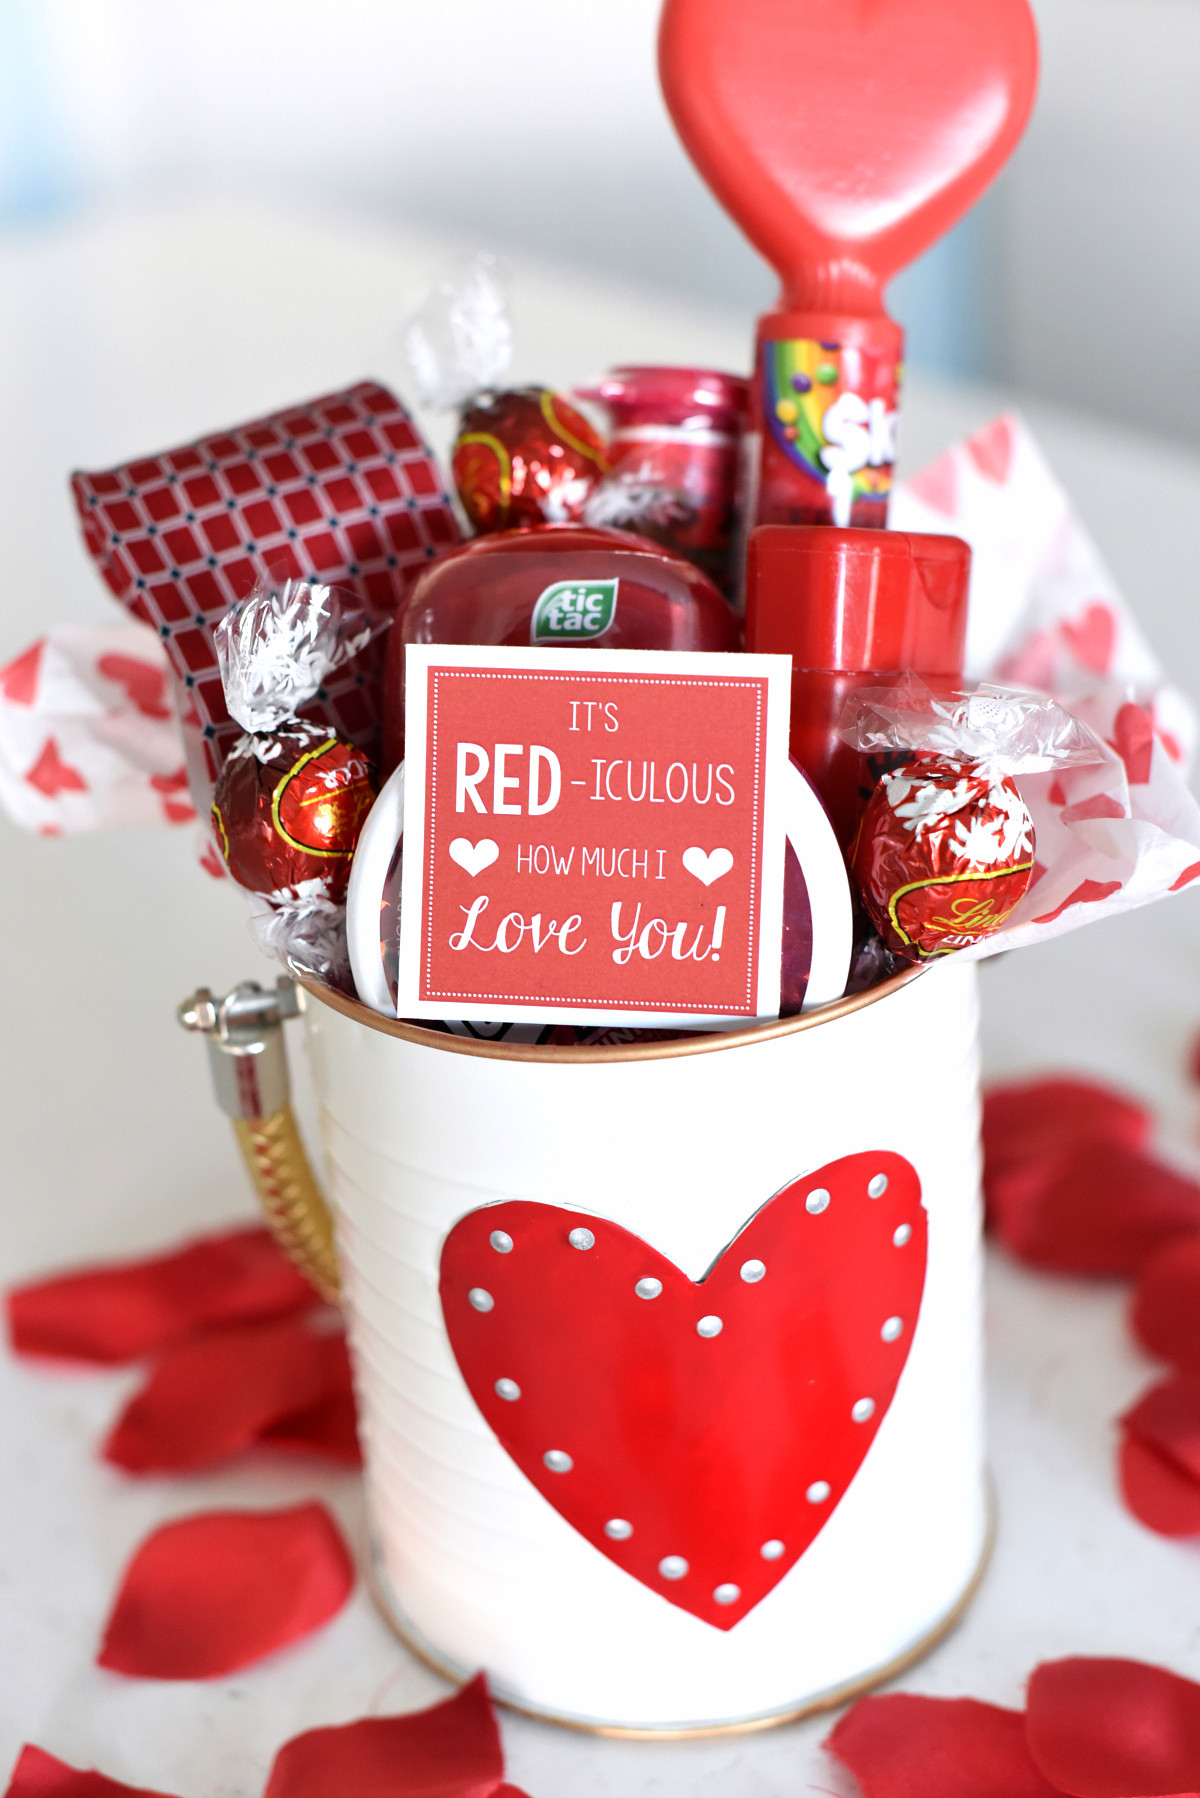 Cute Ideas For Valentines Day For Her
 25 DIY Valentine s Day Gift Ideas Teens Will Love